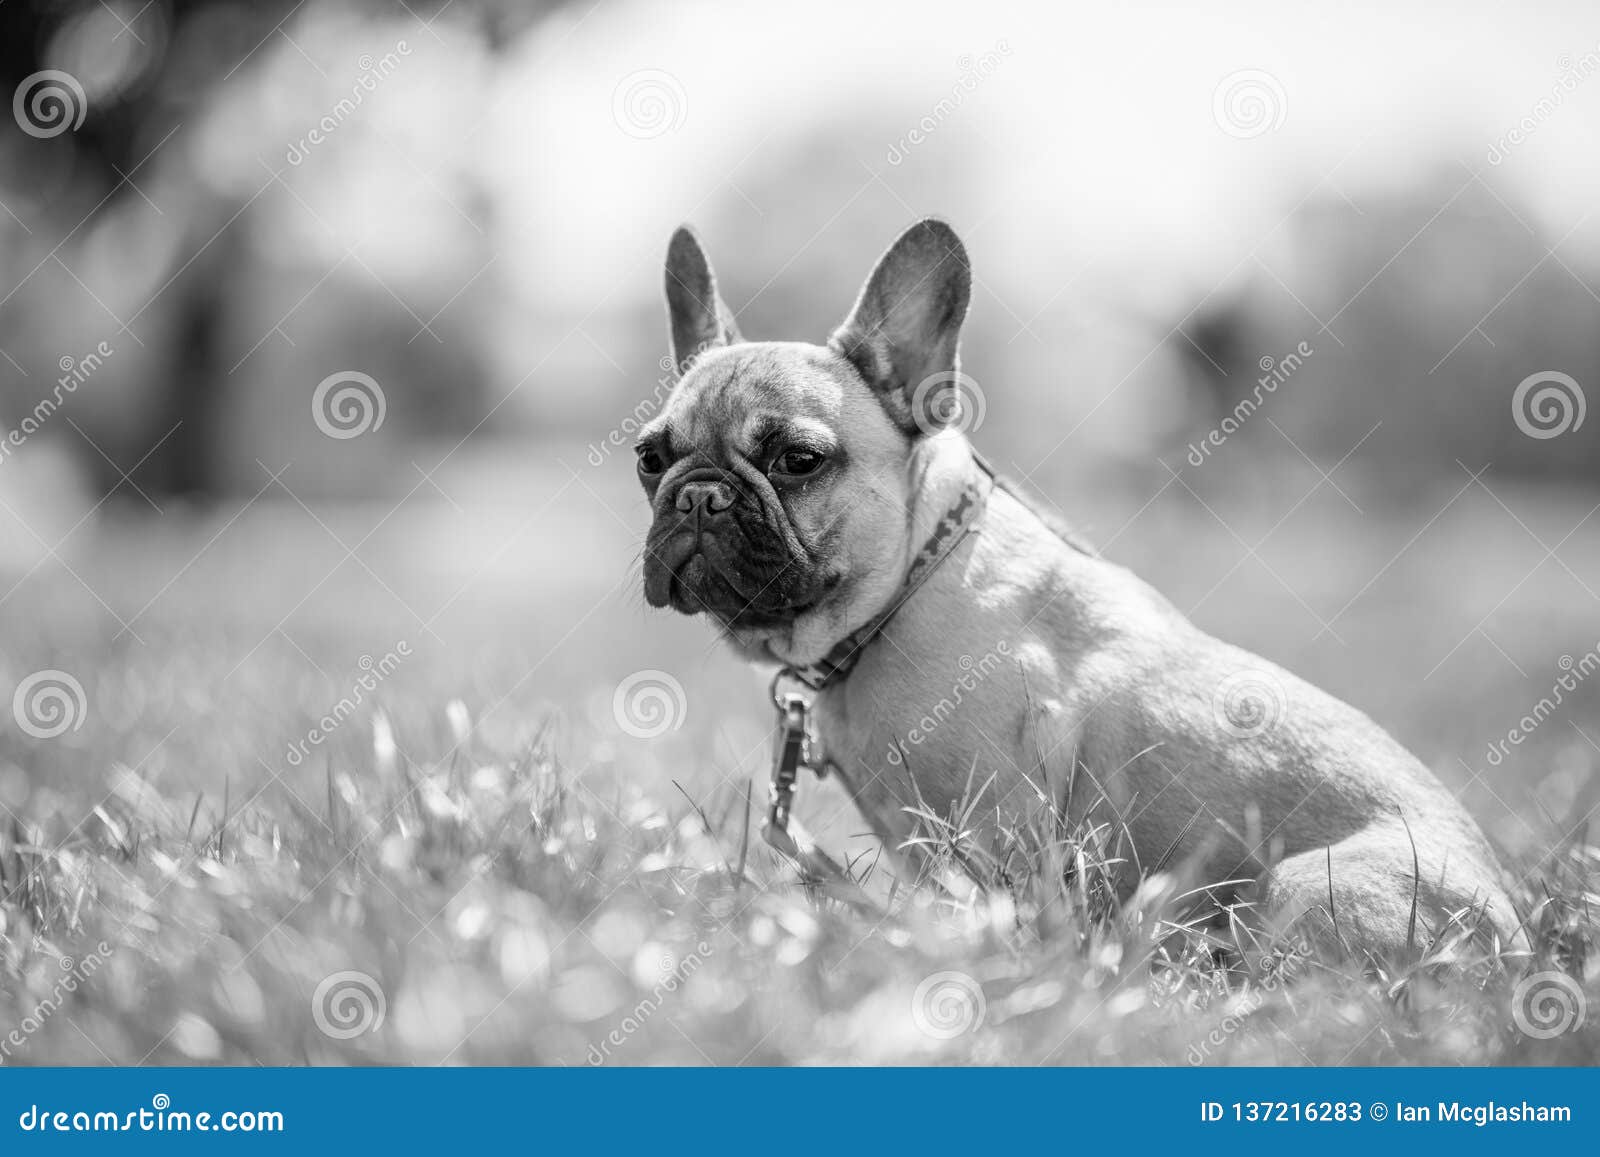 A French Bulldog Portrait Sitting in a Field. Stock Image - Image of ...